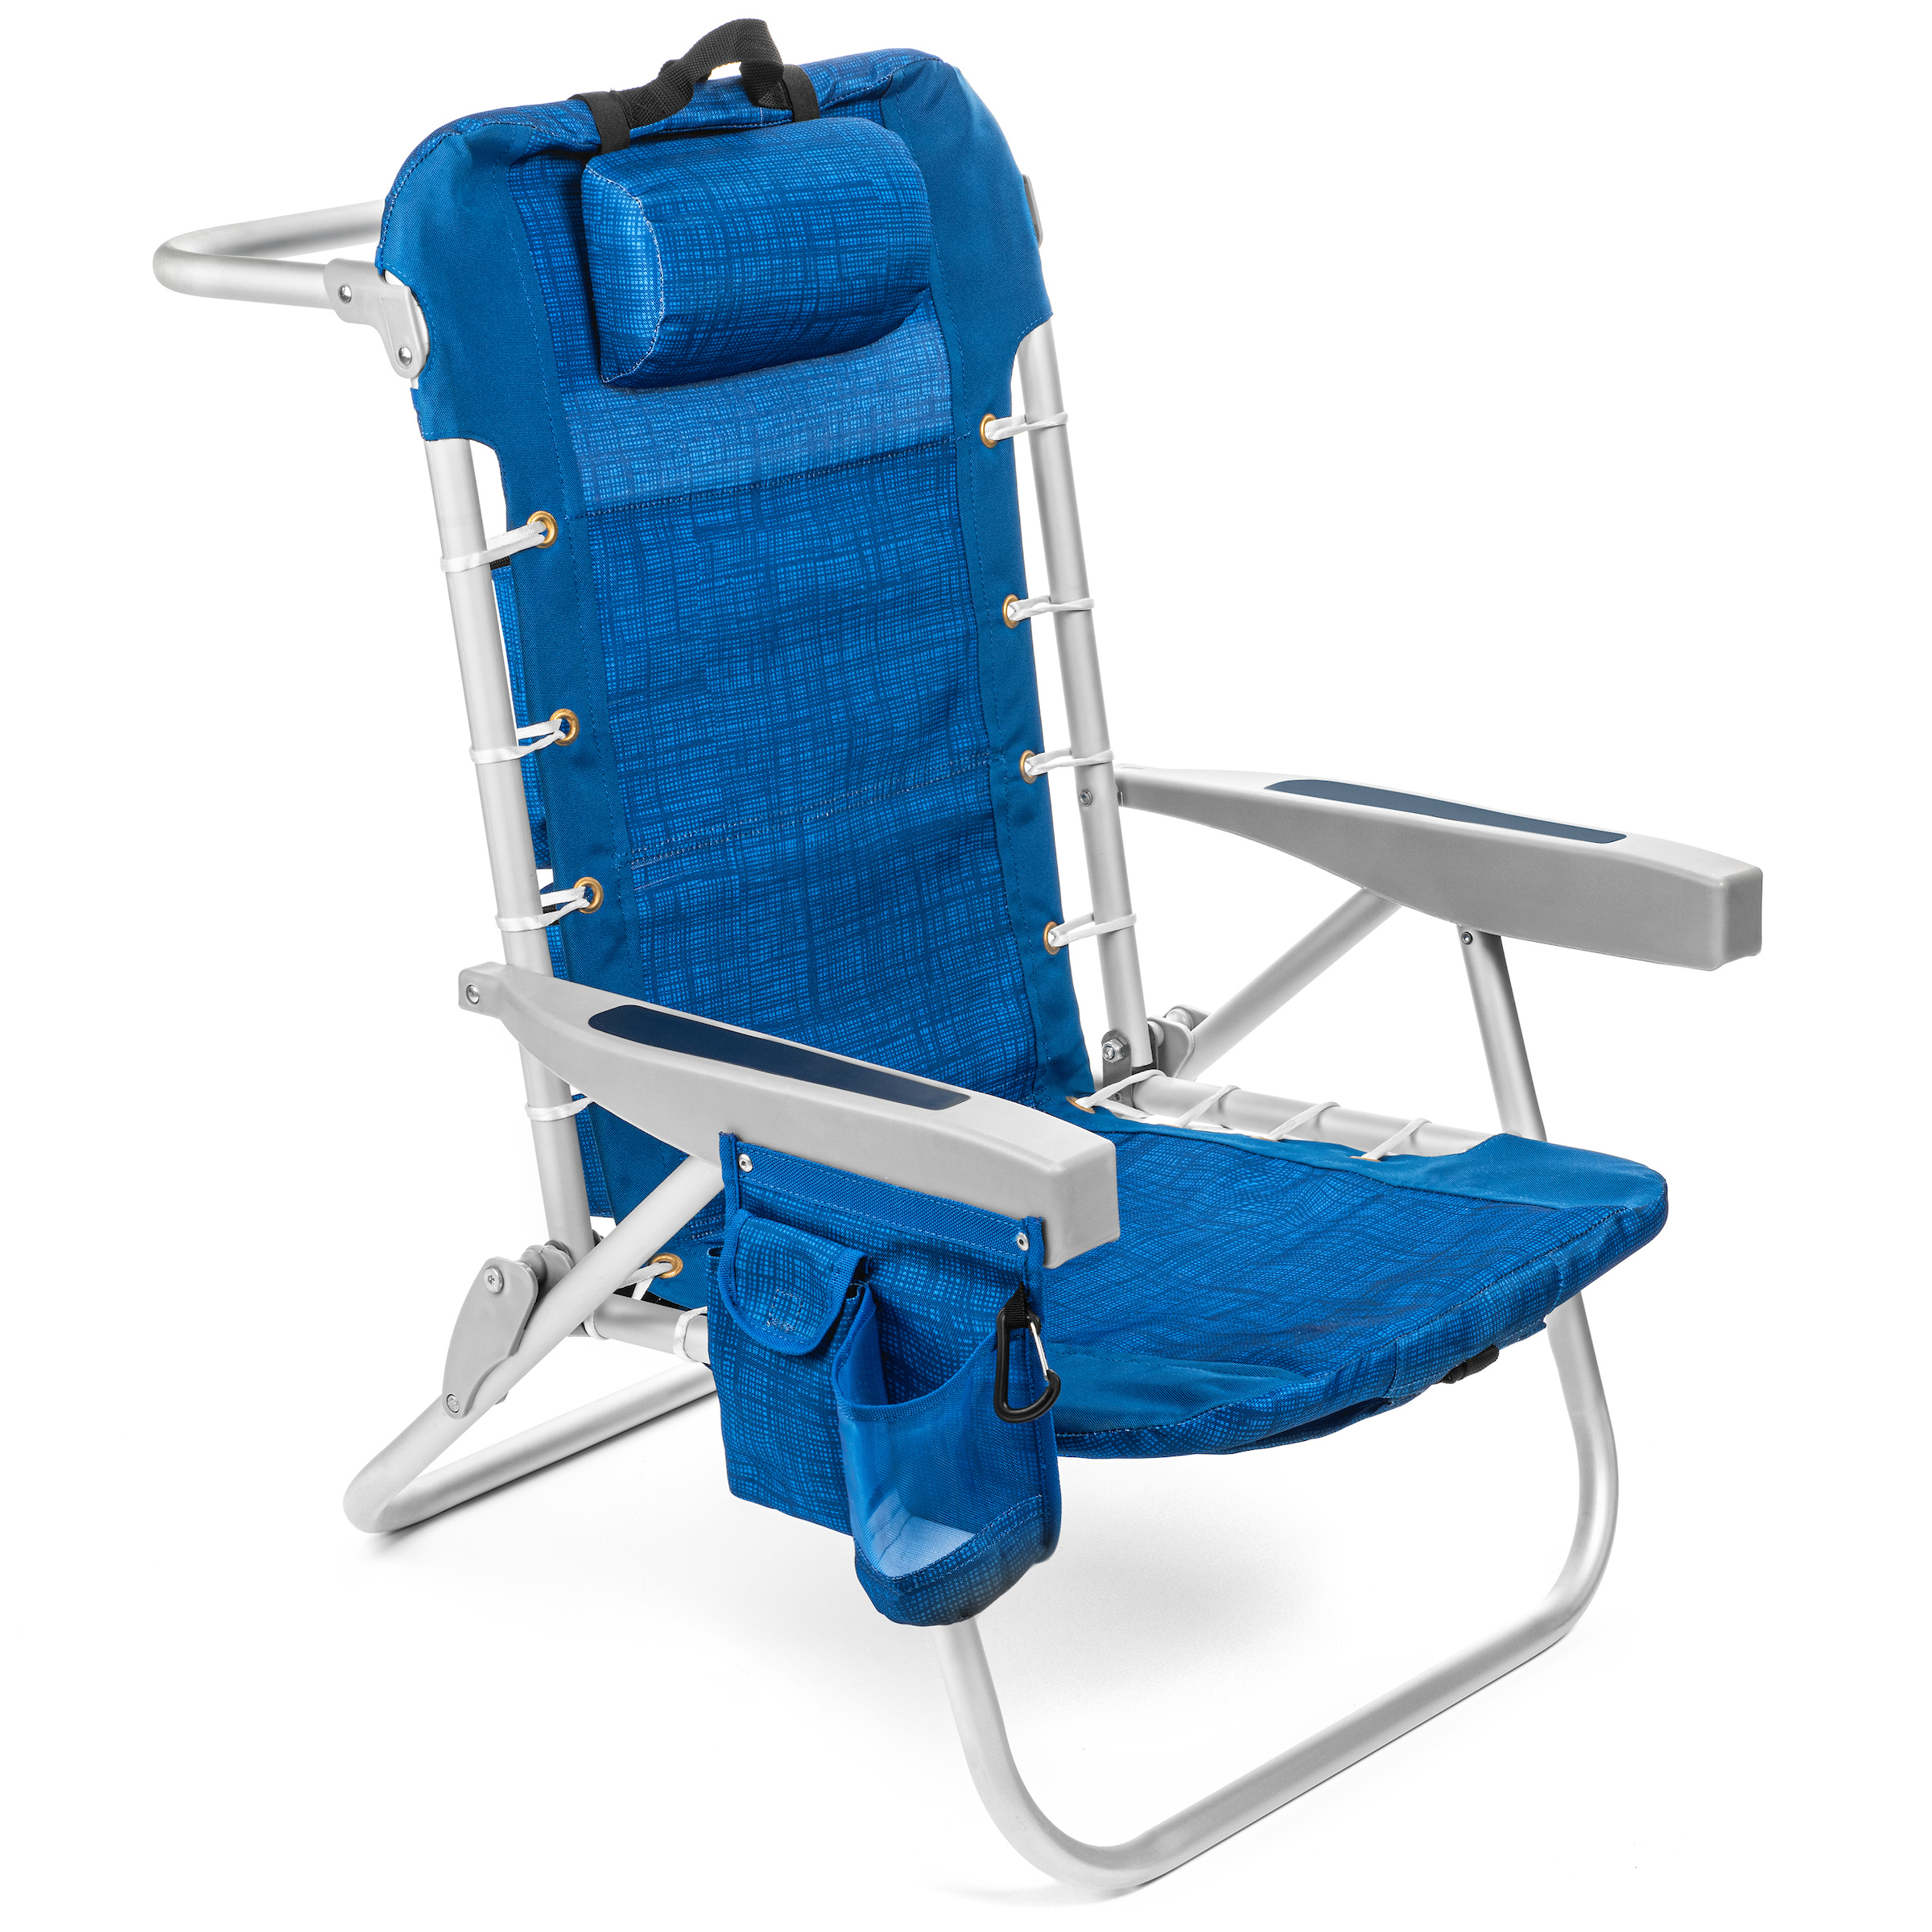 Homevative Folding Backpack Beach Chair with 5 Positions, Towel Bar, Blue - image 1 of 5